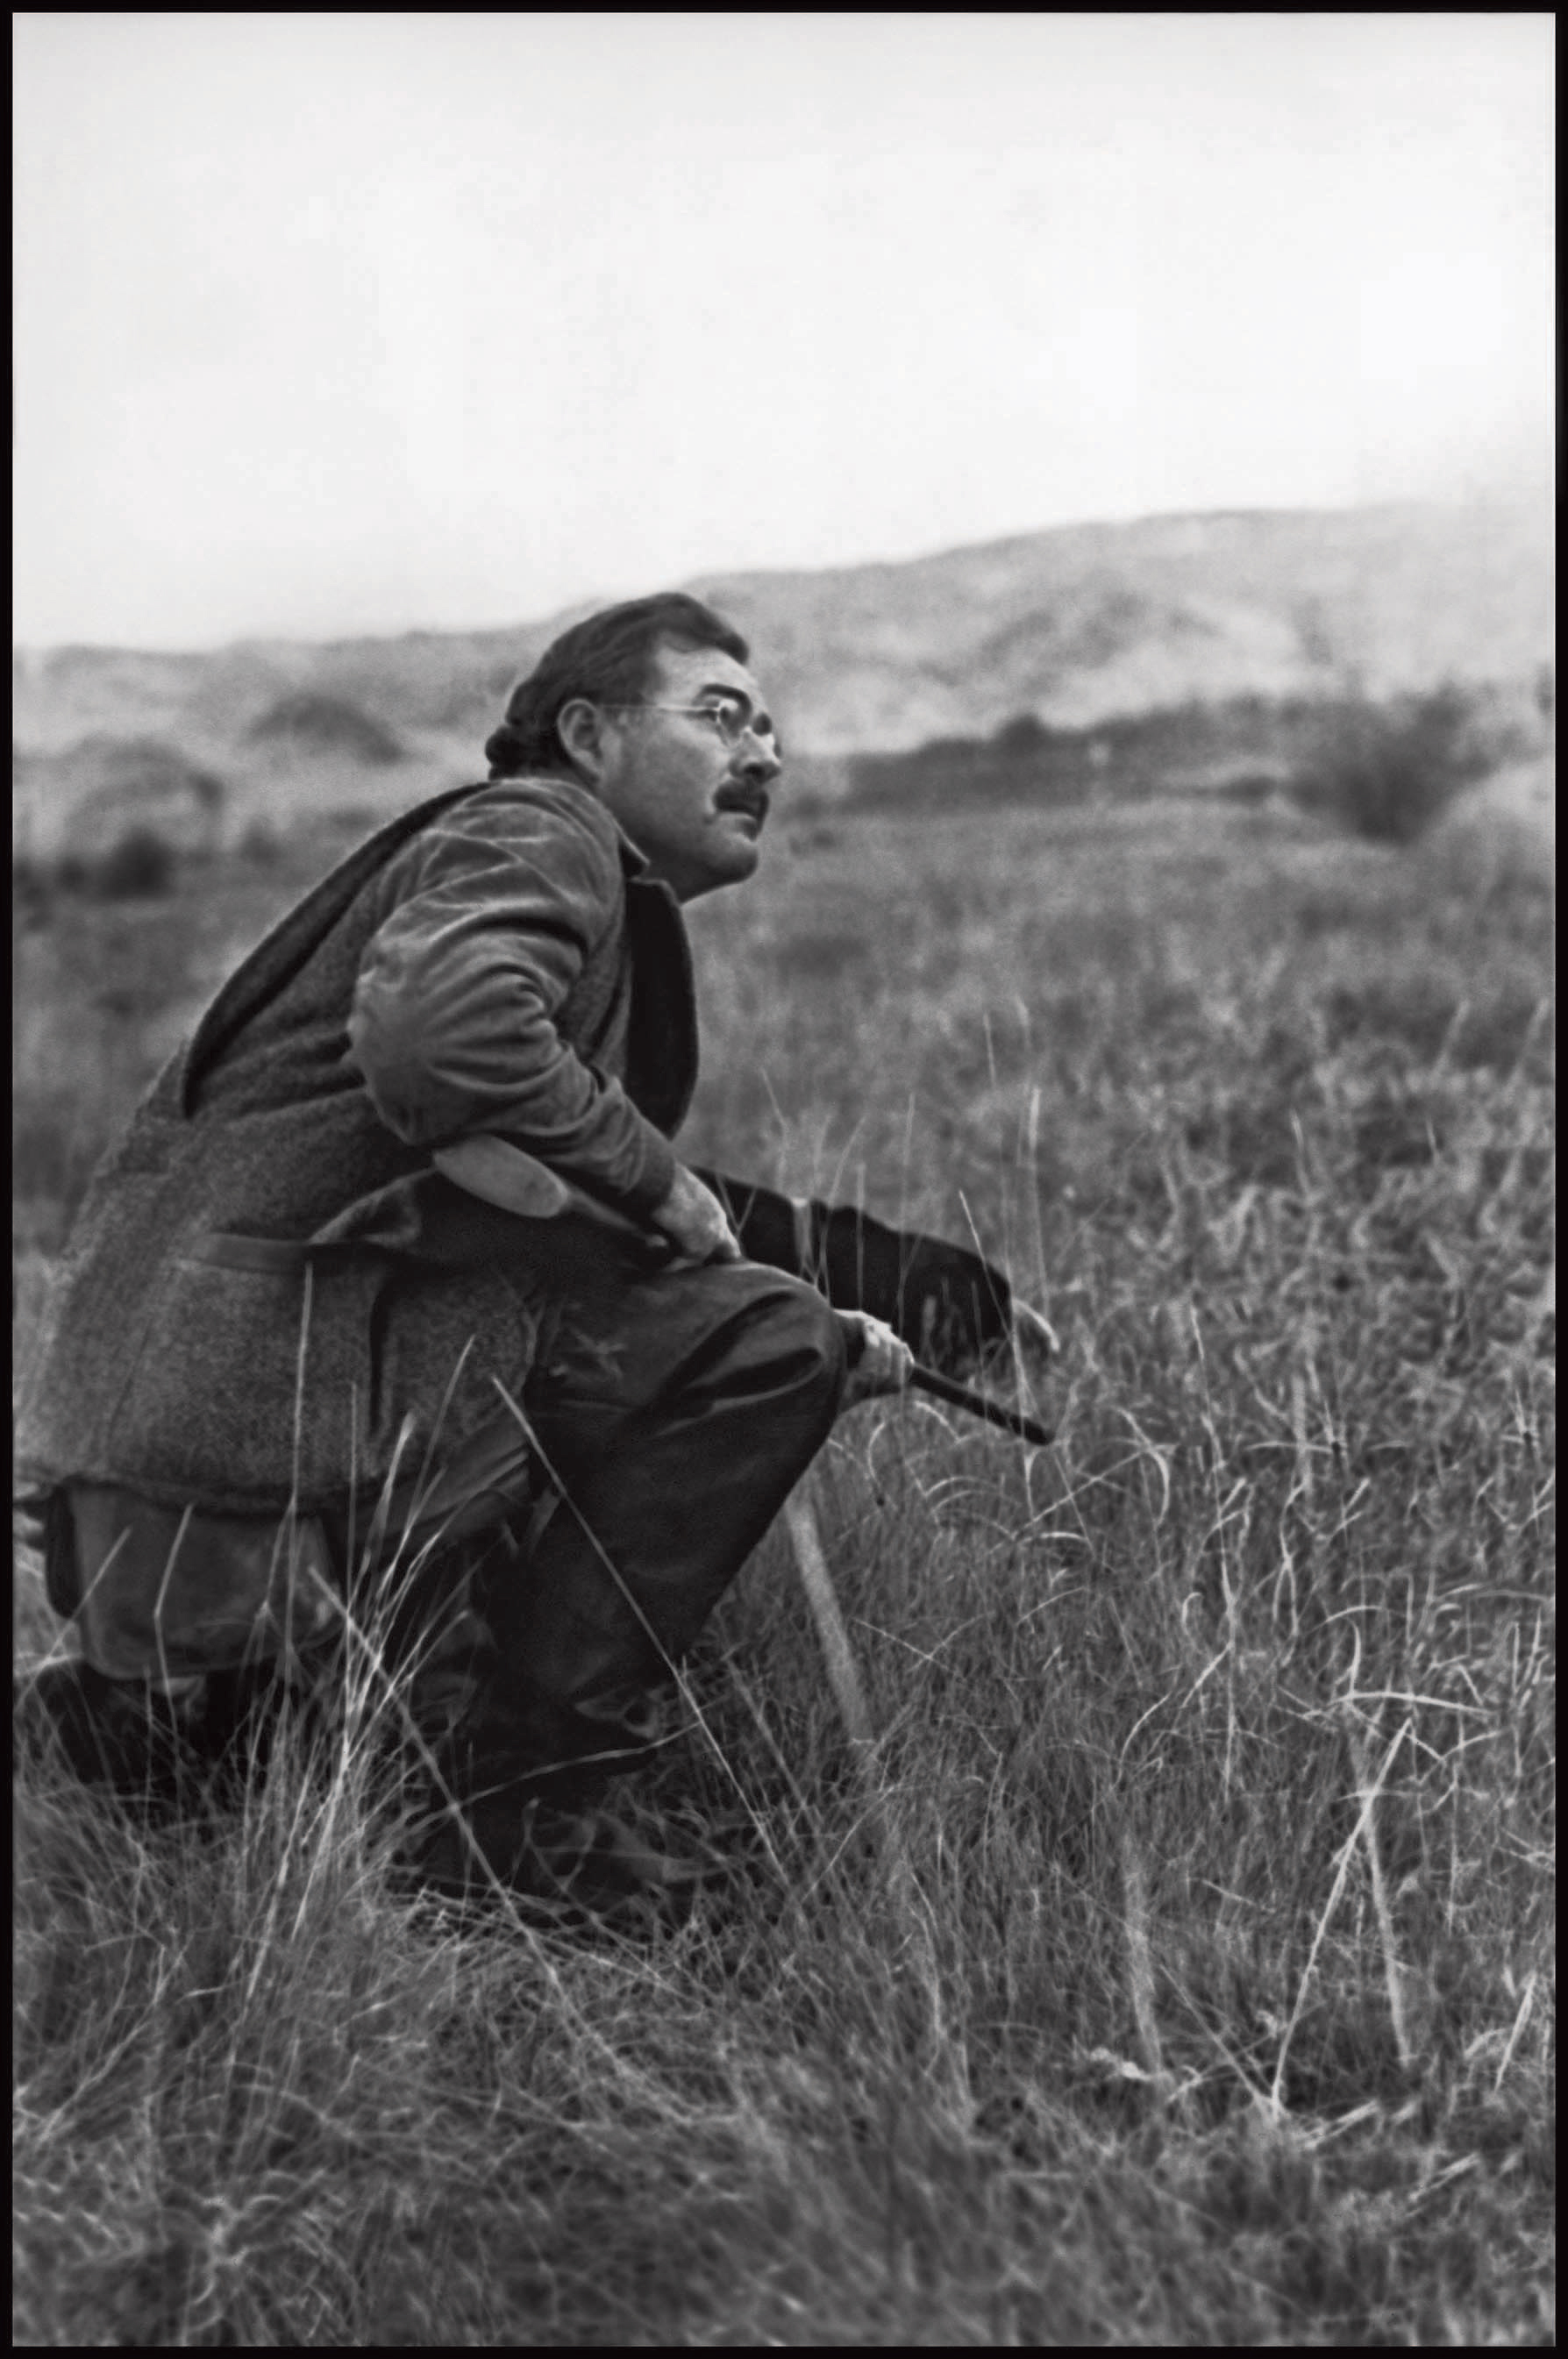 After spending his mornings writing, Hemingway enjoyed afternoons hunting ducks, elk, and pronghorns in the Pahsimeroi Valley. Photography: © Robert Capa/International Center of Photography/Magnum Photos